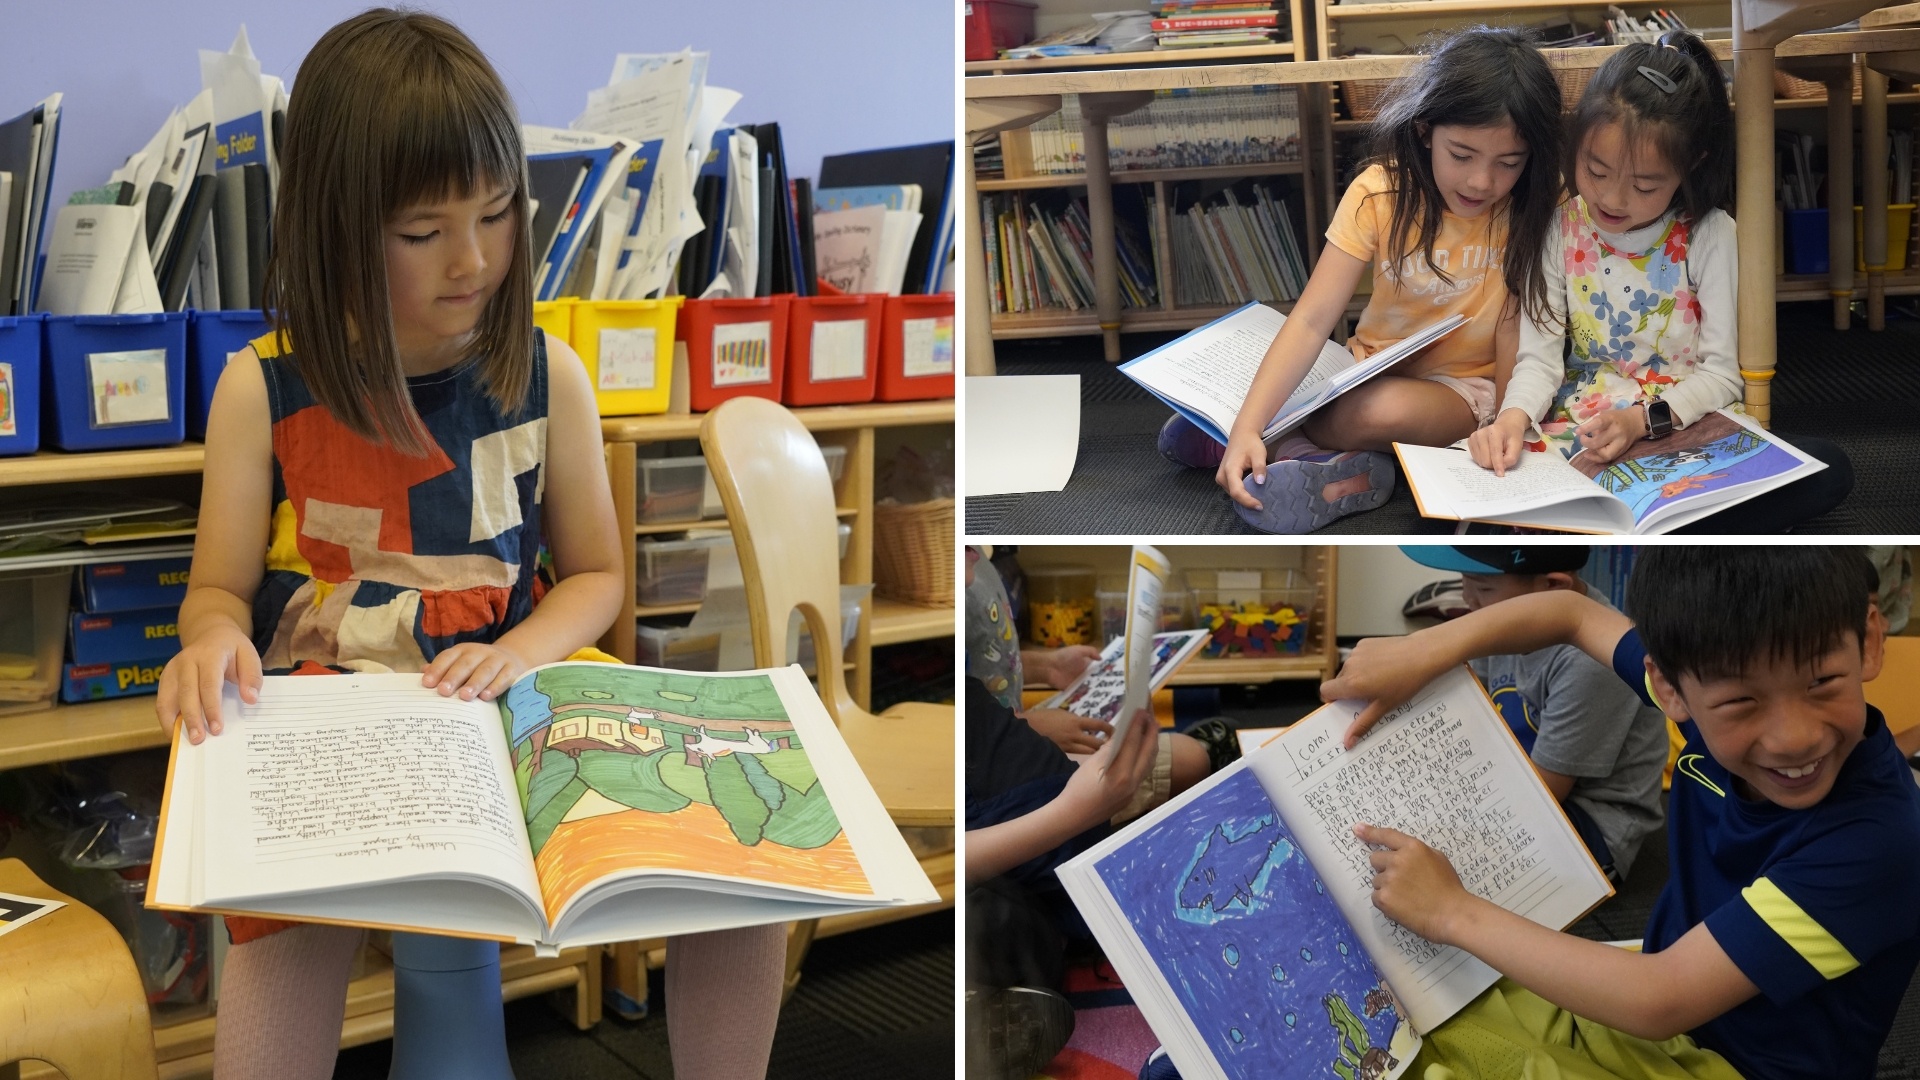 Three photos of students reading their published works.